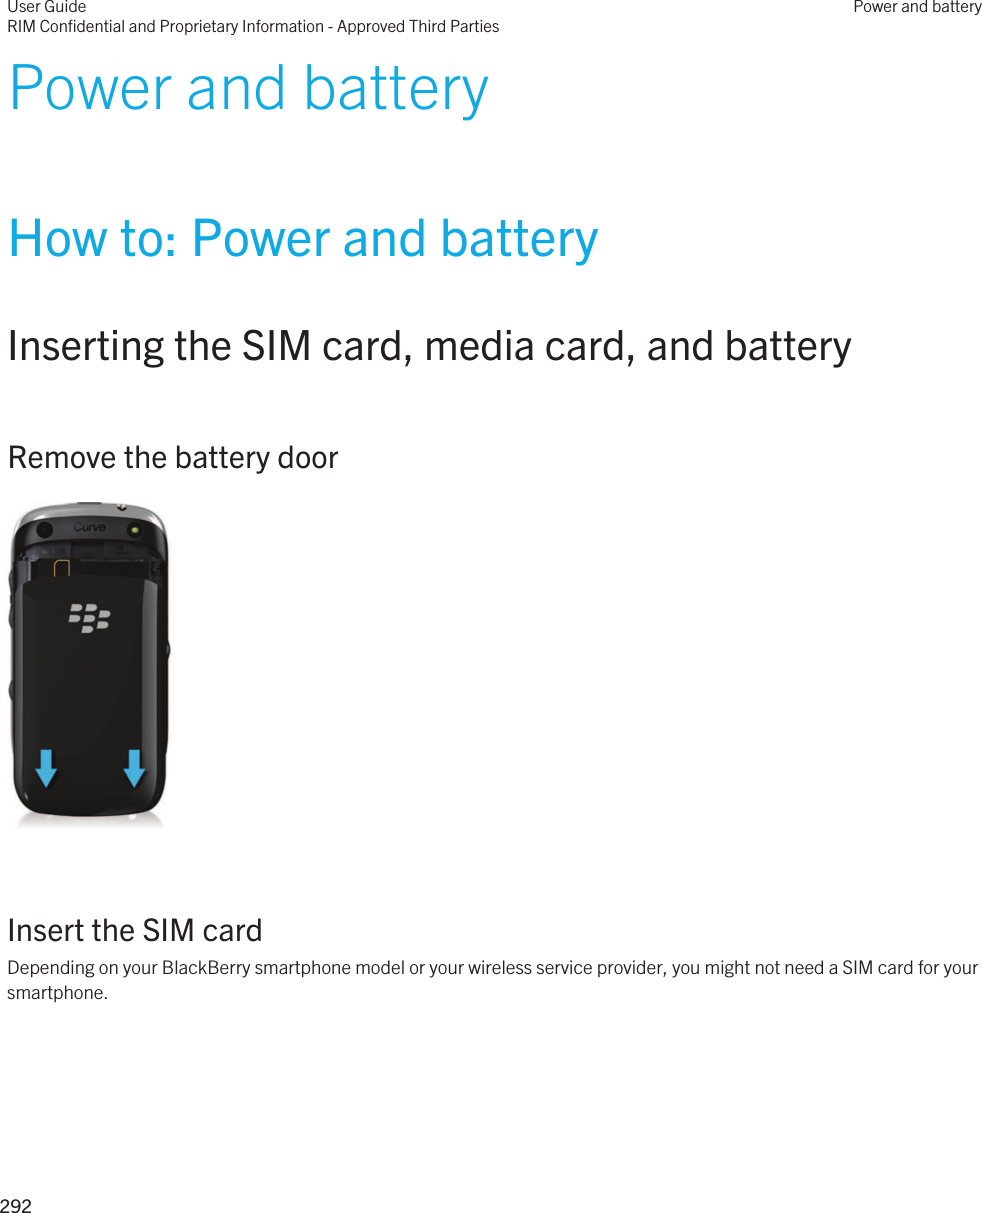 Power and batteryHow to: Power and batteryInserting the SIM card, media card, and batteryRemove the battery door  Insert the SIM cardDepending on your BlackBerry smartphone model or your wireless service provider, you might not need a SIM card for your smartphone. User GuideRIM Confidential and Proprietary Information - Approved Third PartiesPower and battery292 